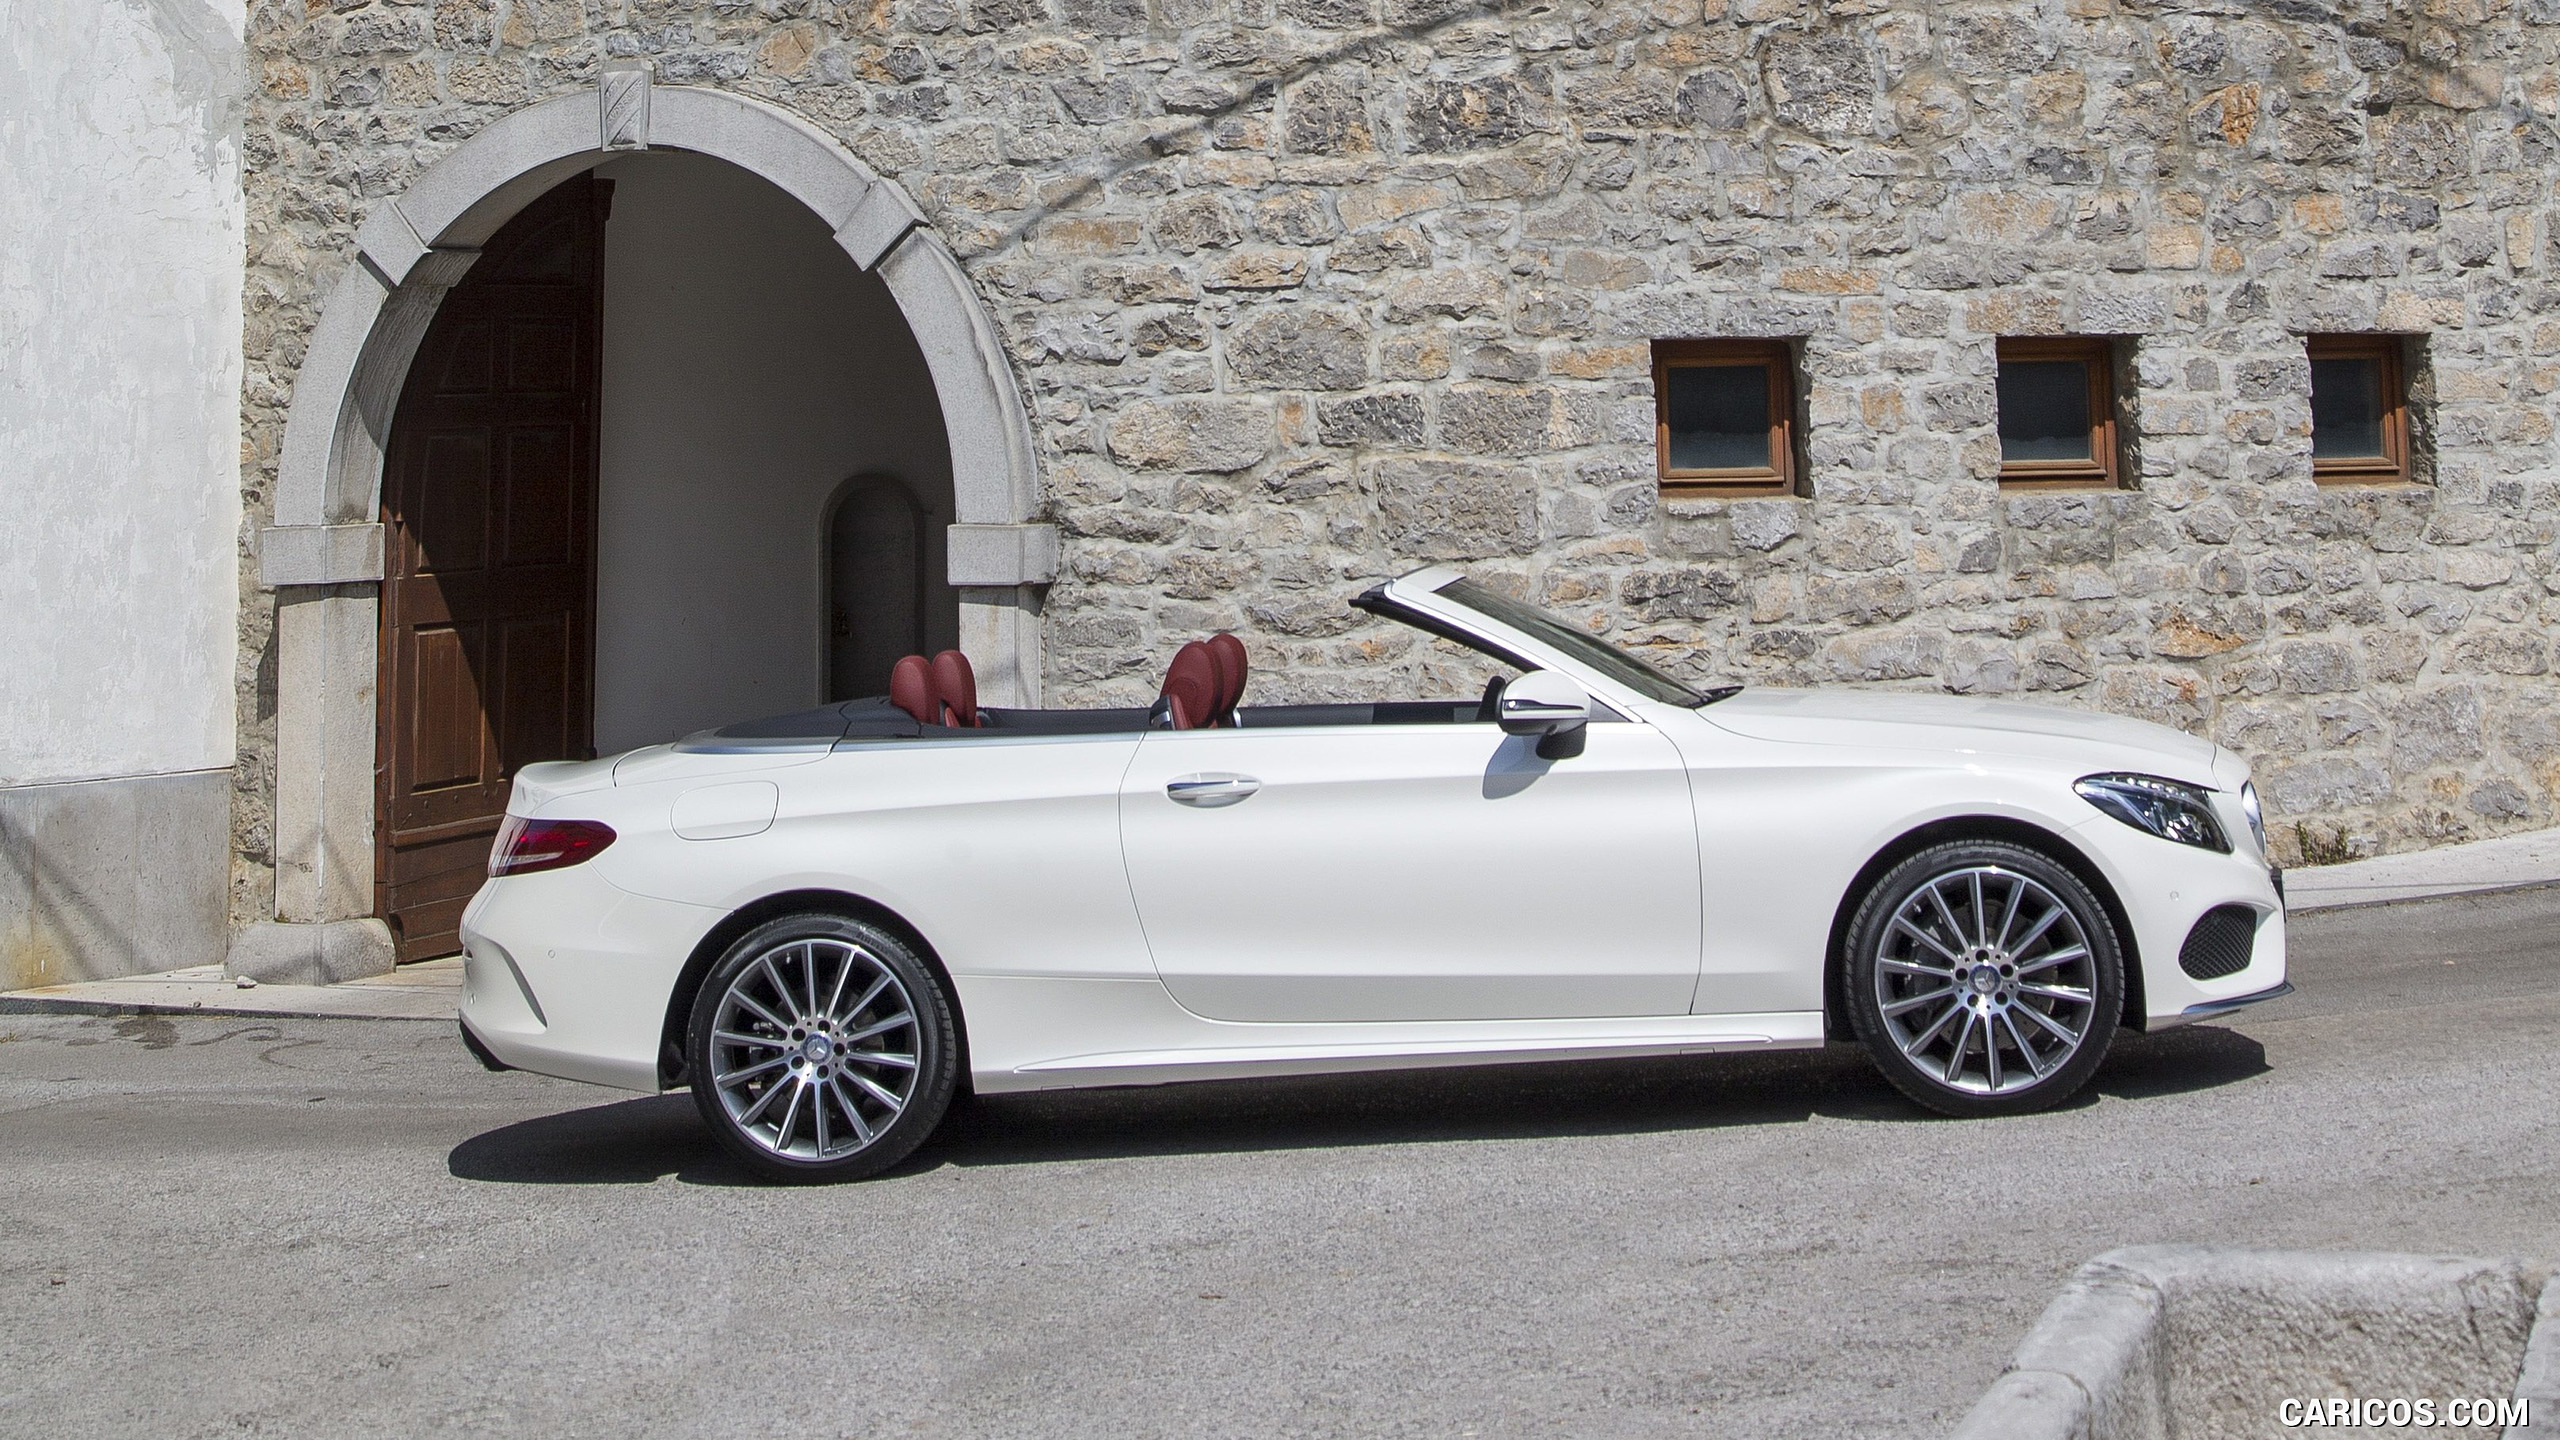 2017 Mercedes-Benz C-Class C300 Cabriolet - Side, #72 of 96